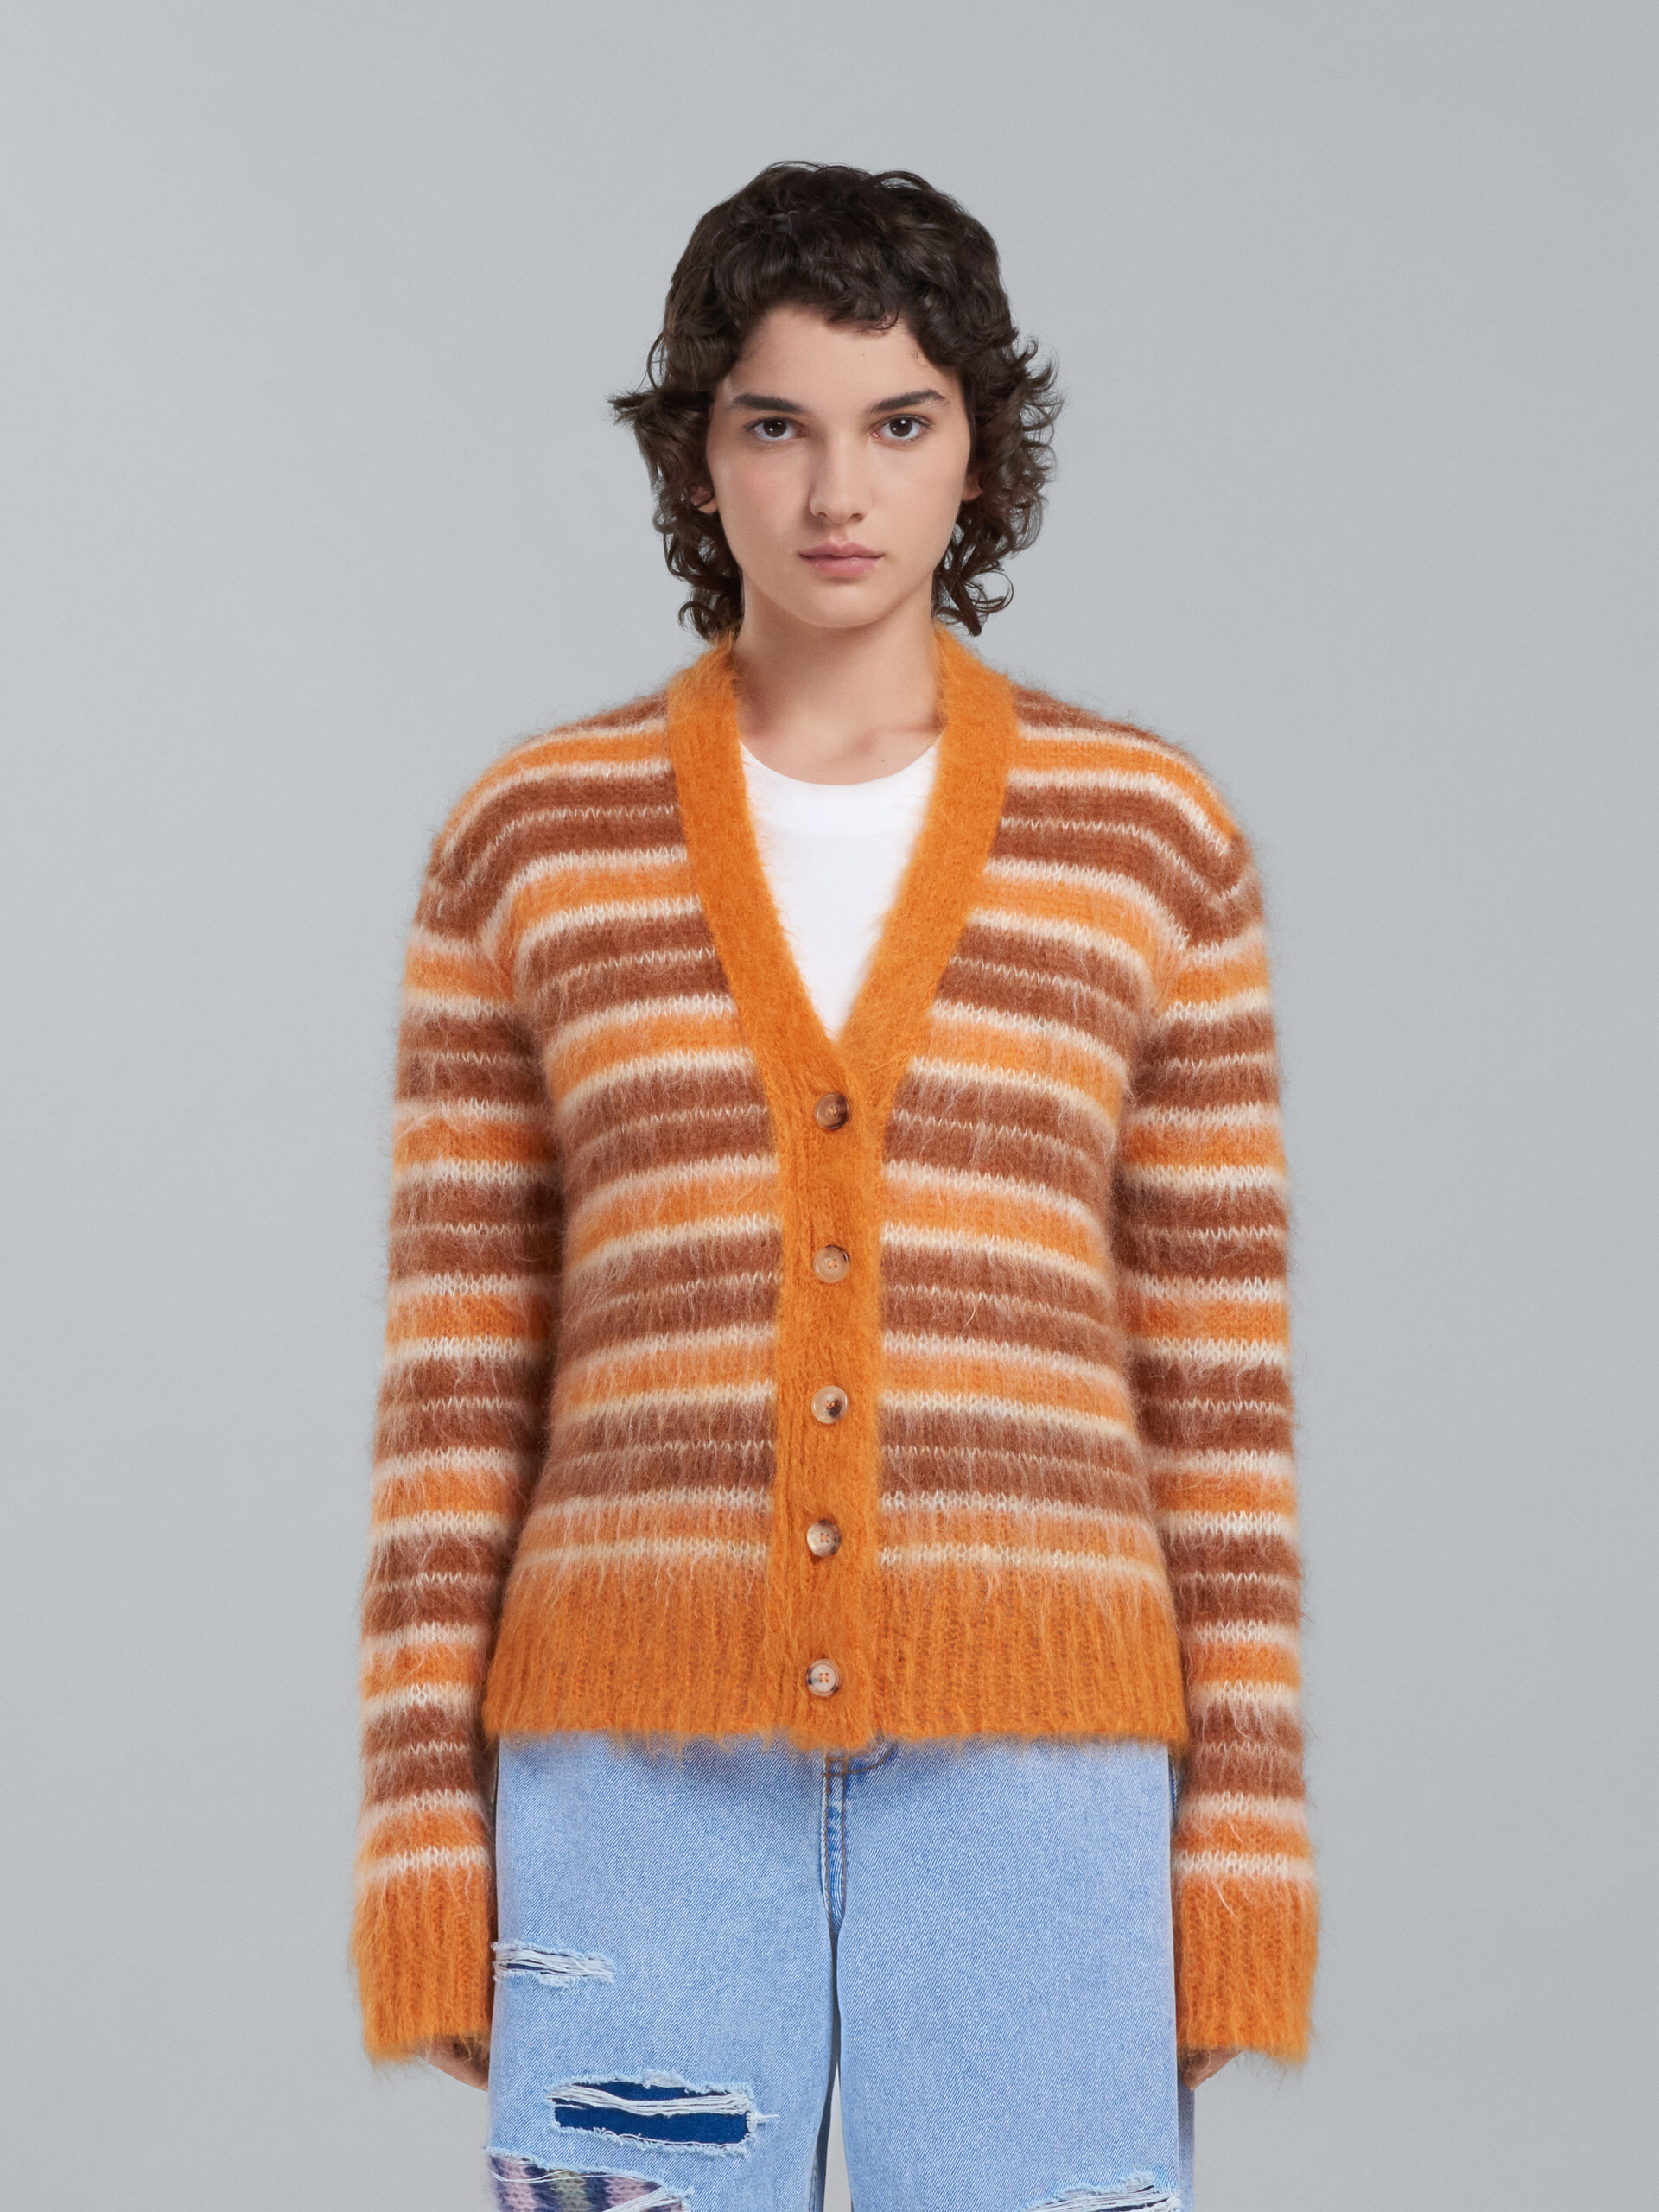 Mohair cardigan with orange stripes - Pullovers - Image 2